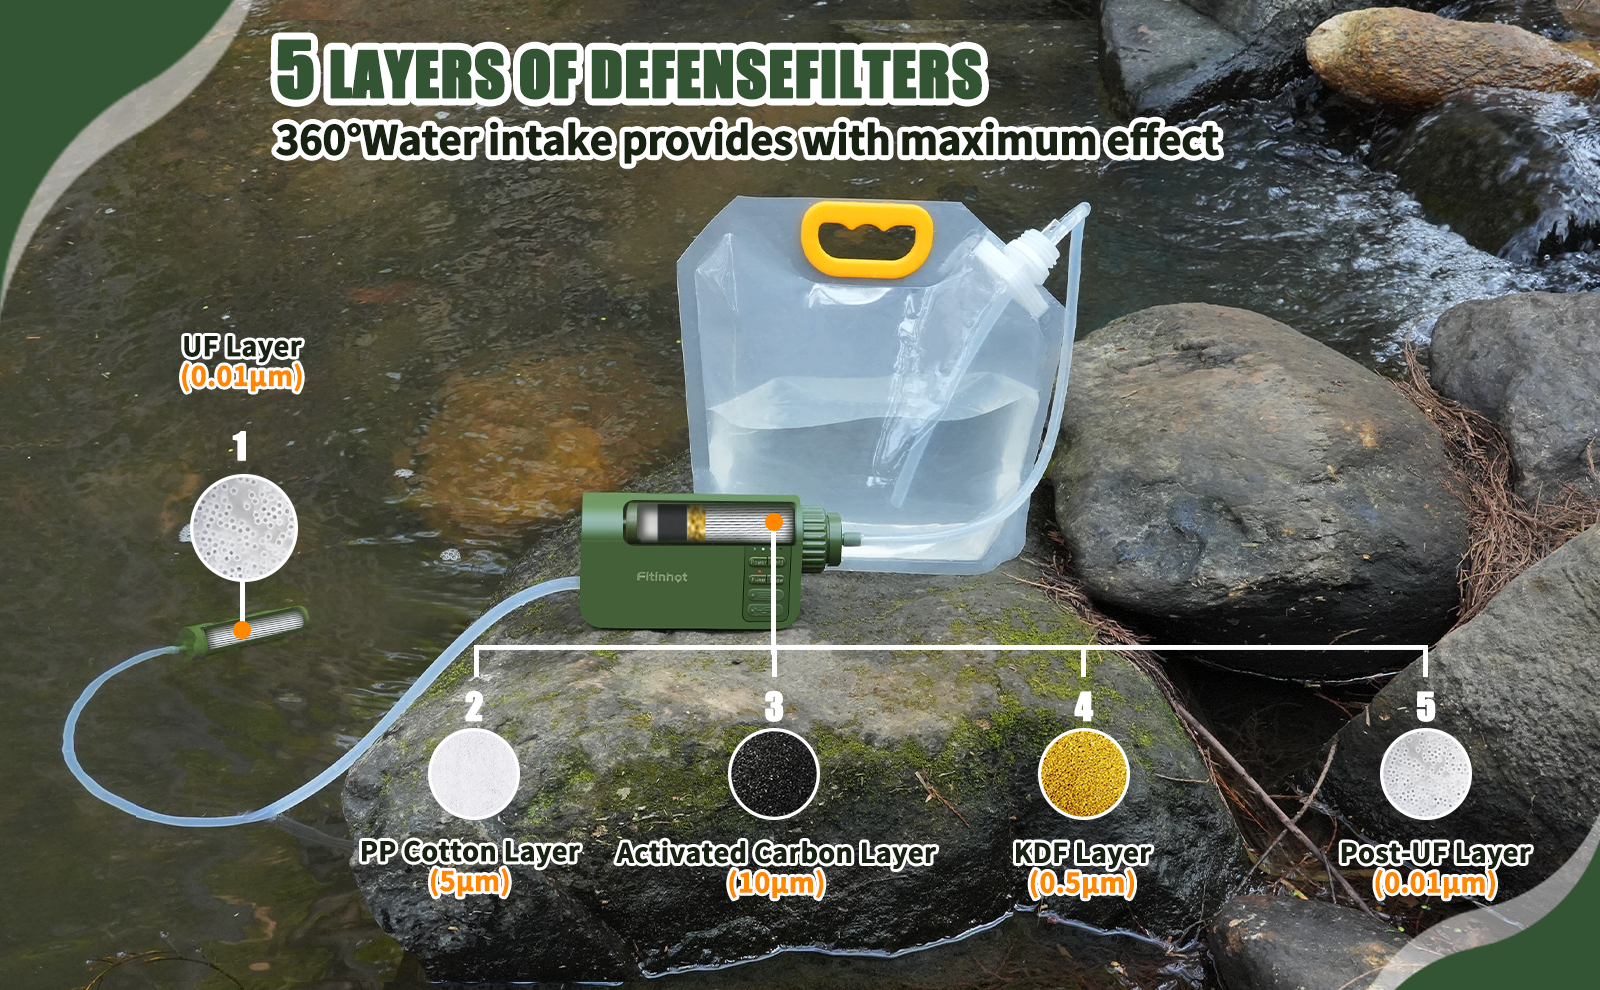 5 LAYERS OF DEFENSE FILTERS